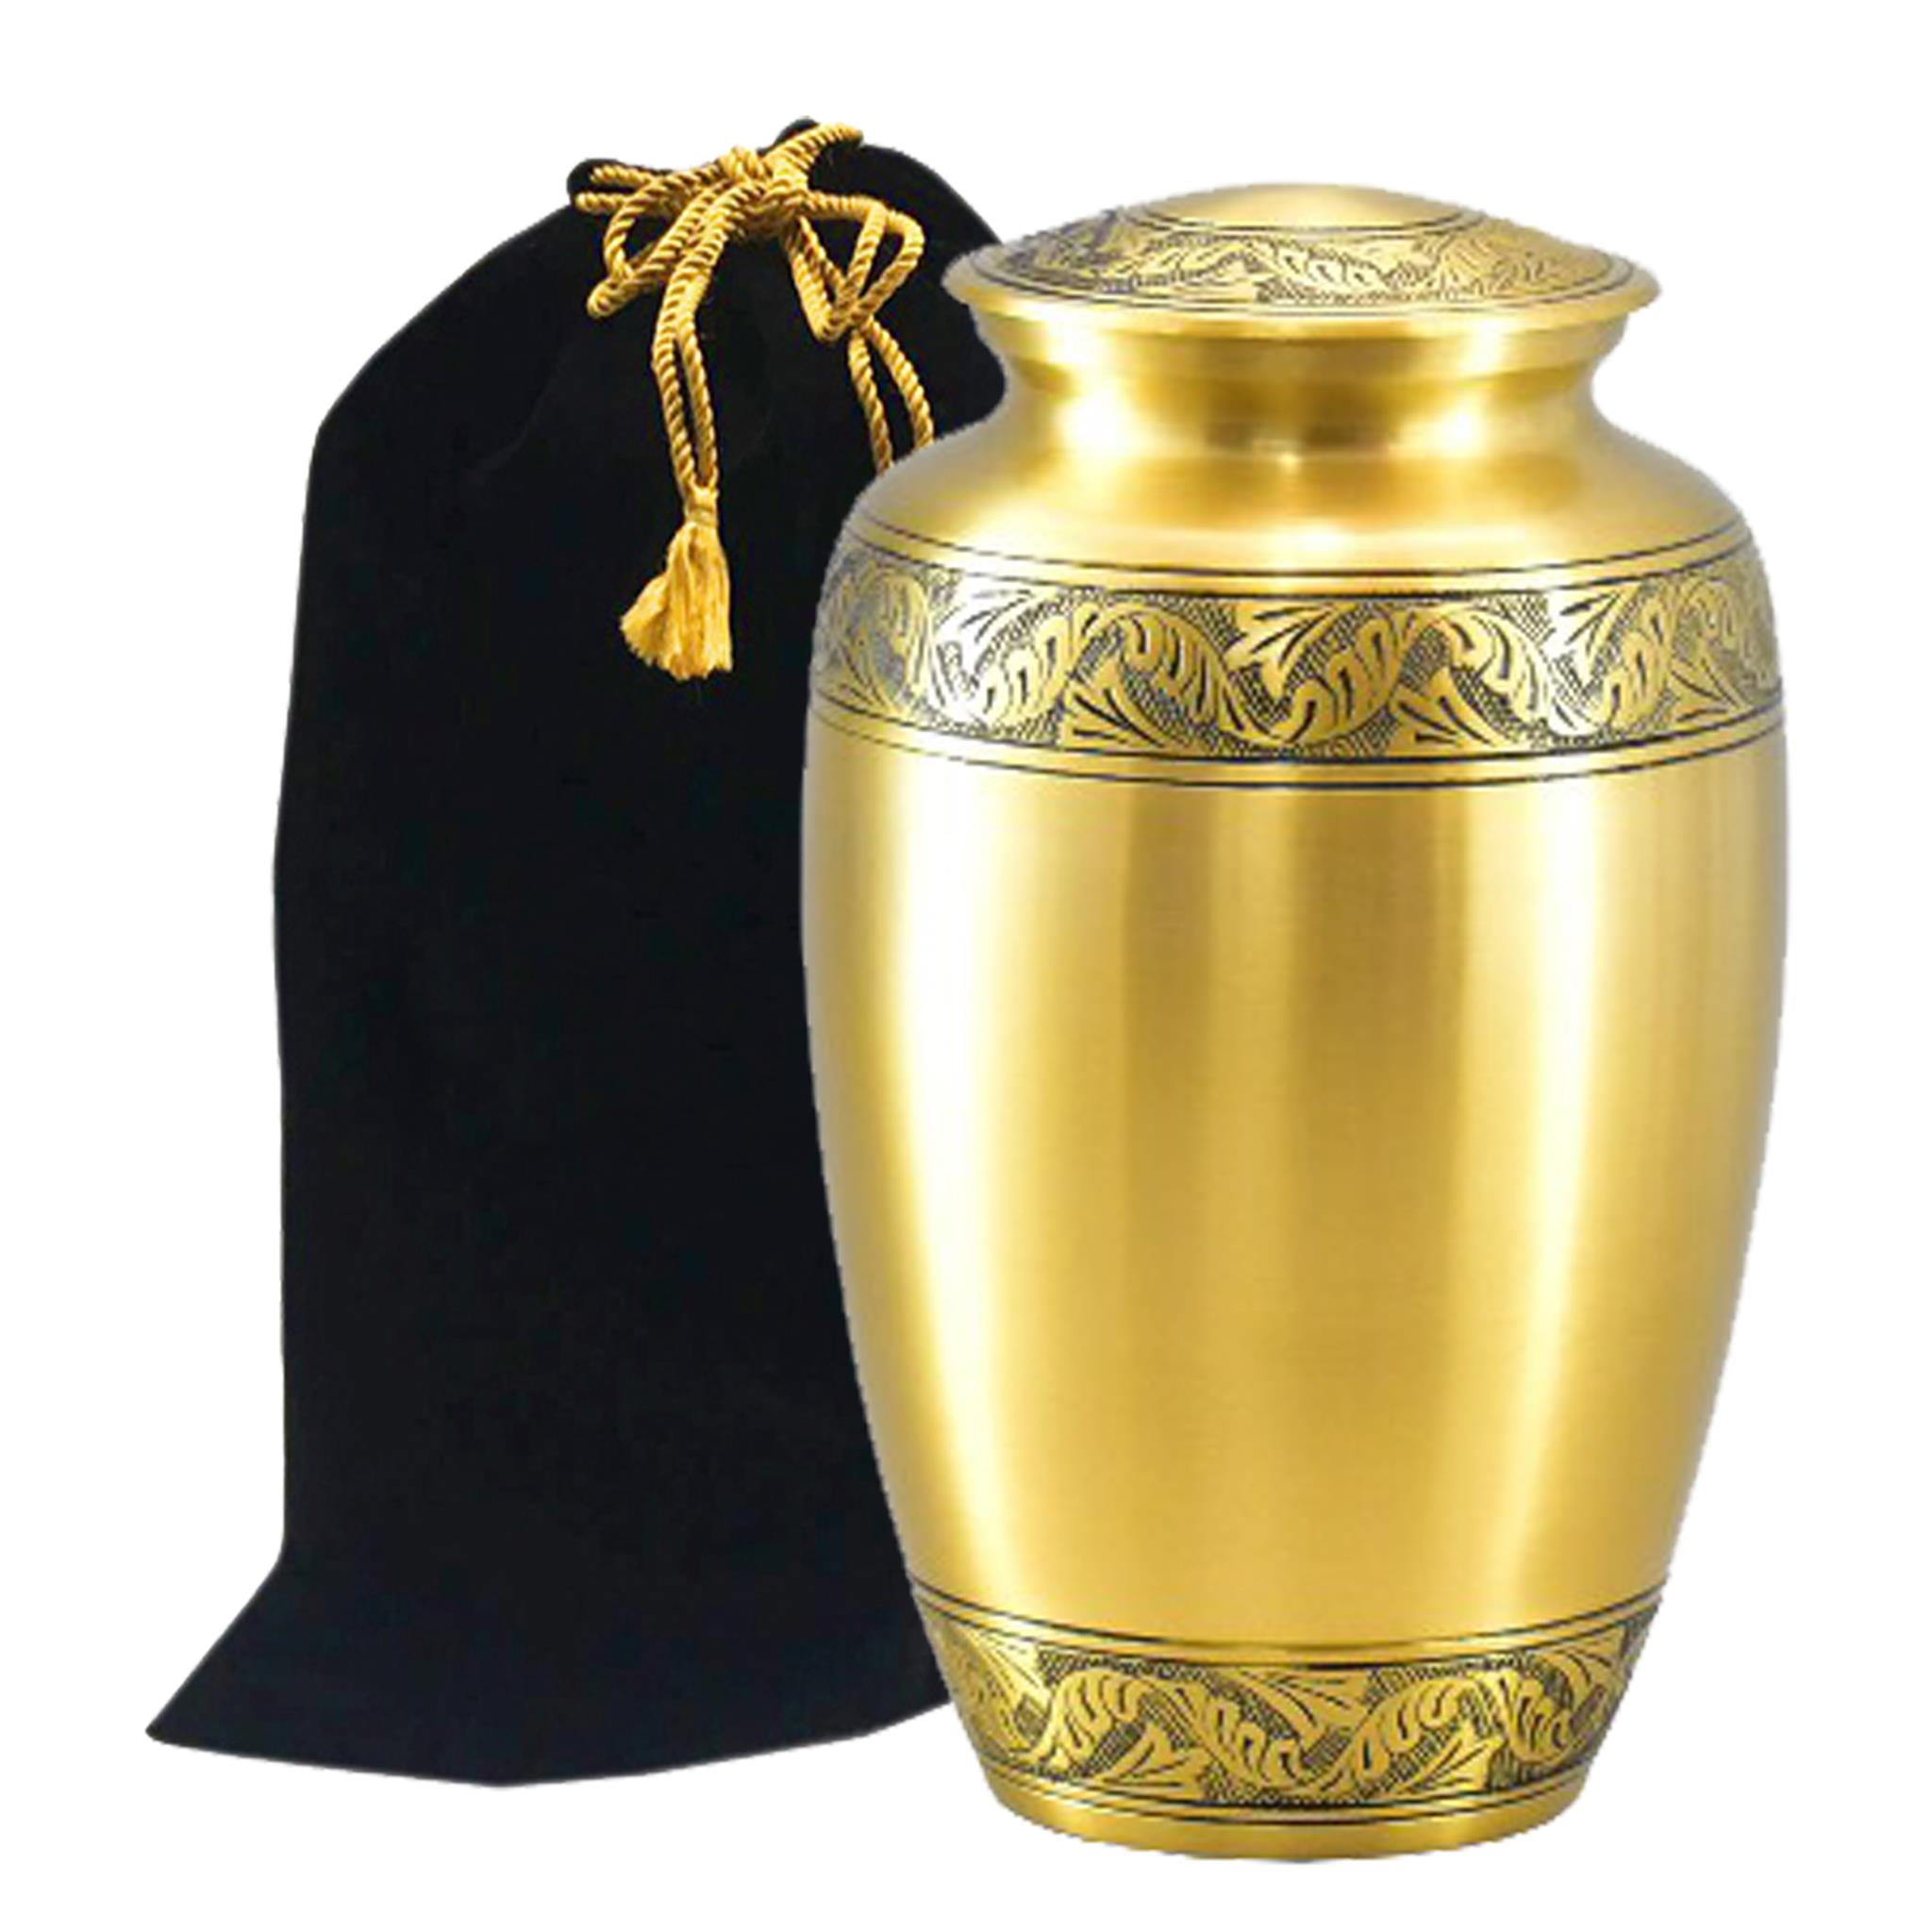 Classic Pewter Brass Cremation Urn Beautifully Handcrafted Adult Funeral Urn Solid Brass